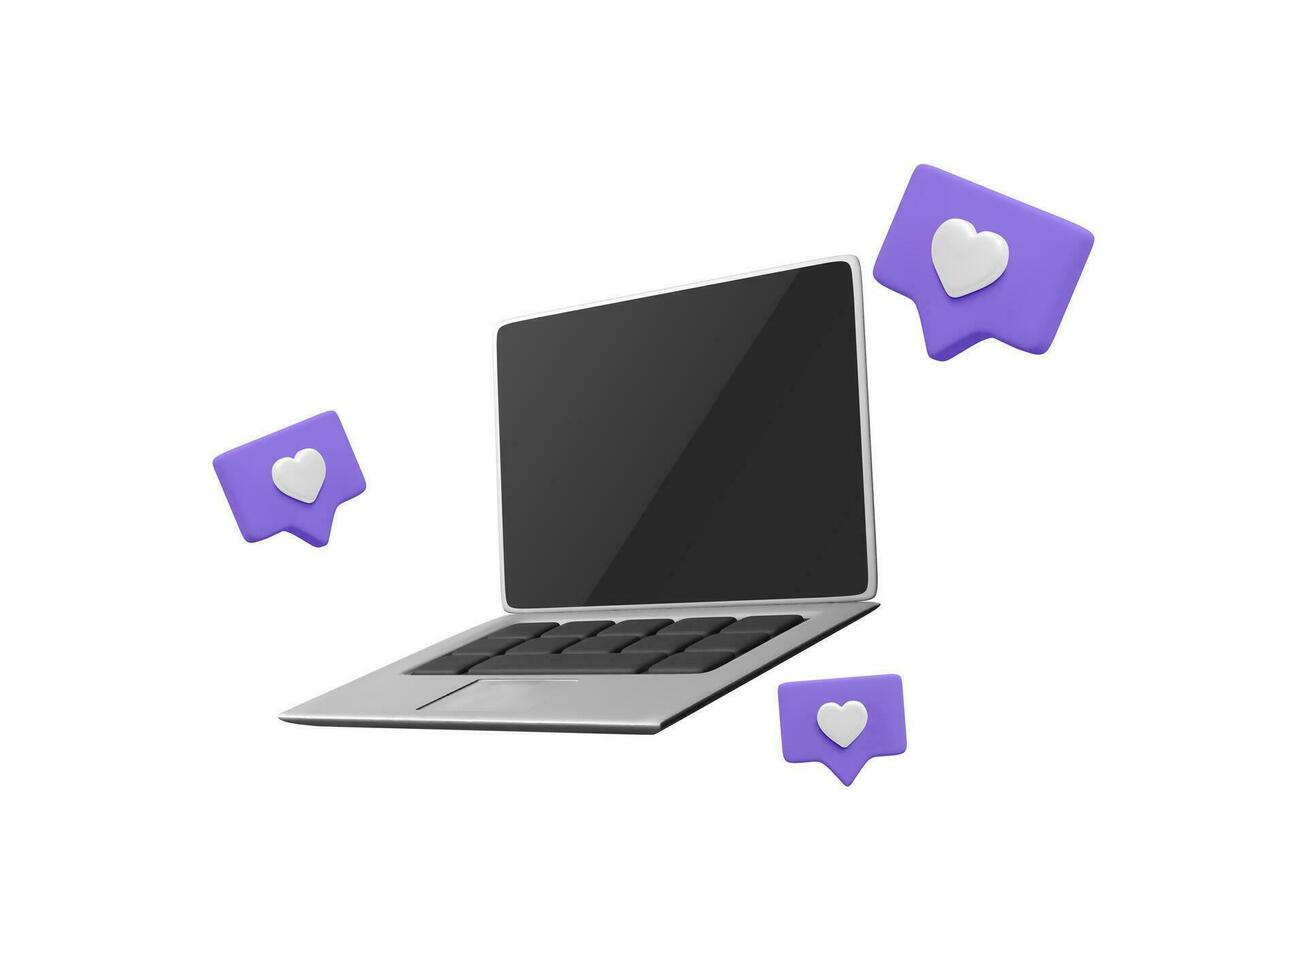 3d realistic laptop with social media likes flying around the device. Online social concept with laptop in cartoon style. Vector illustration